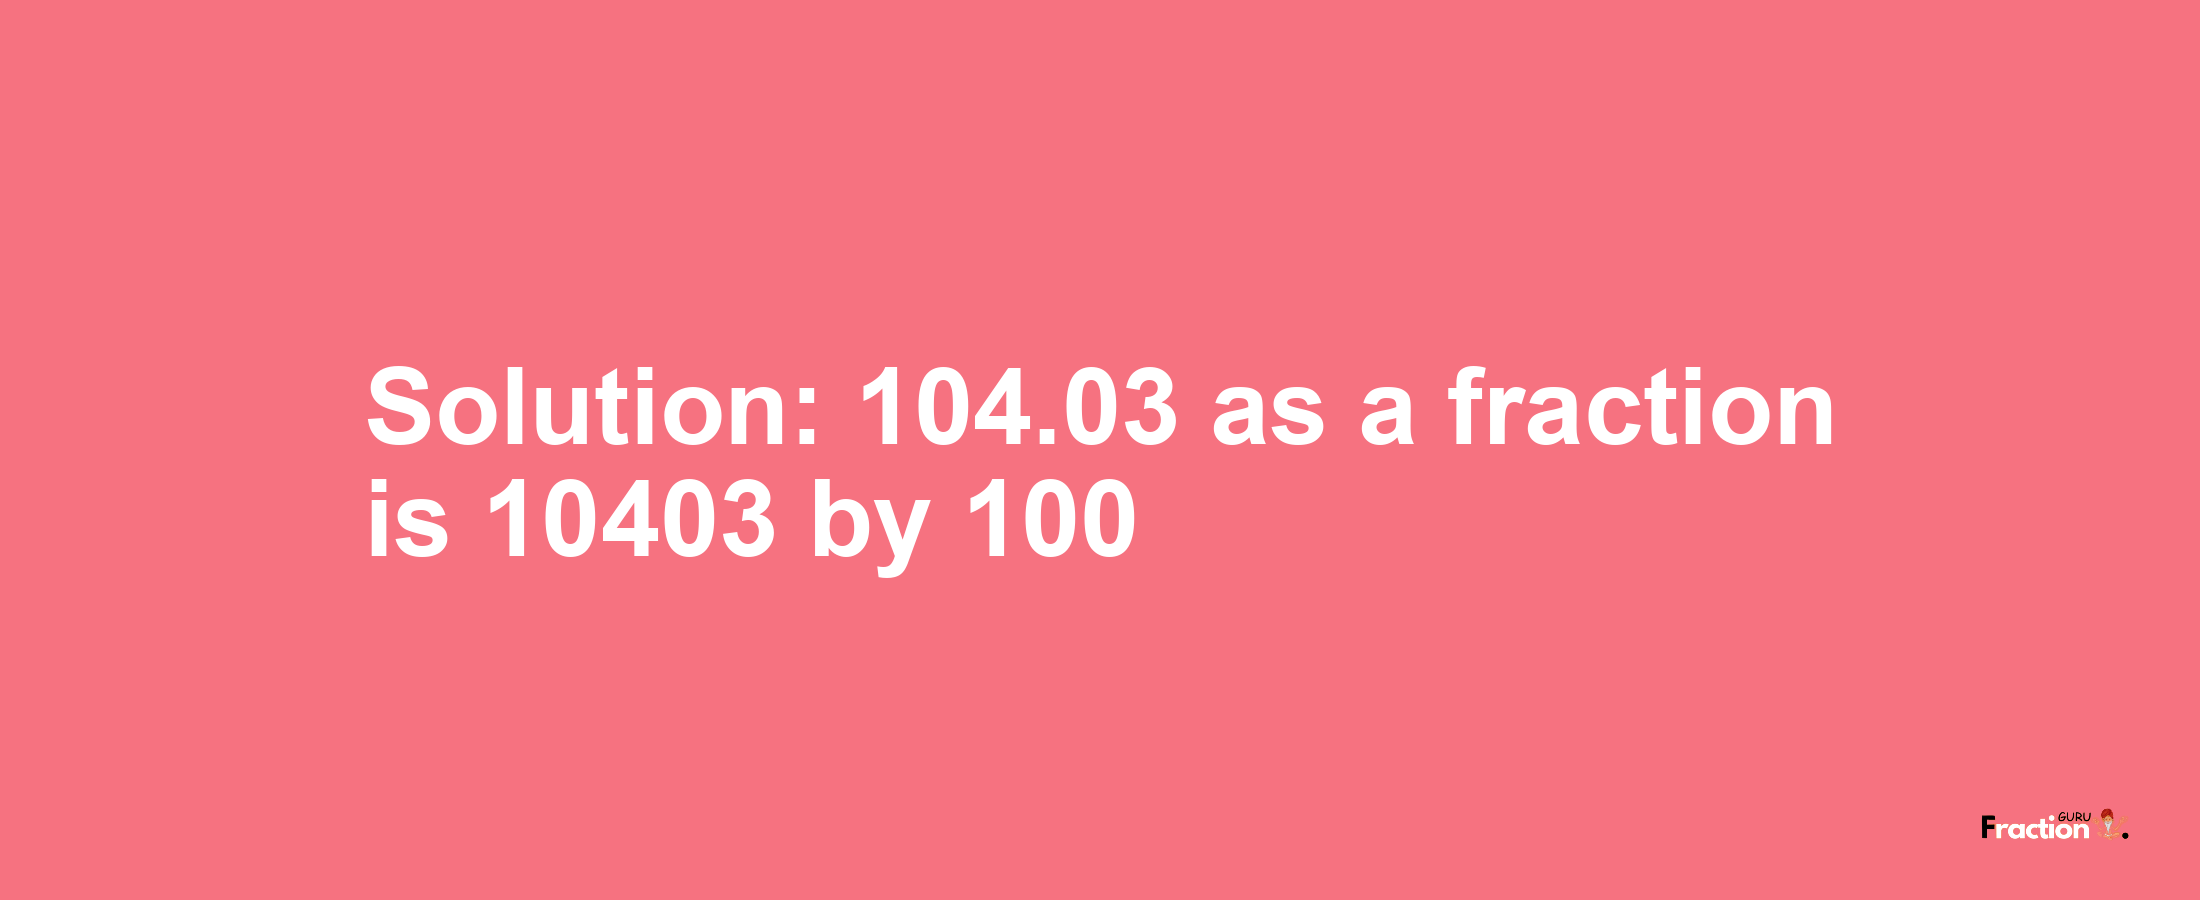 Solution:104.03 as a fraction is 10403/100